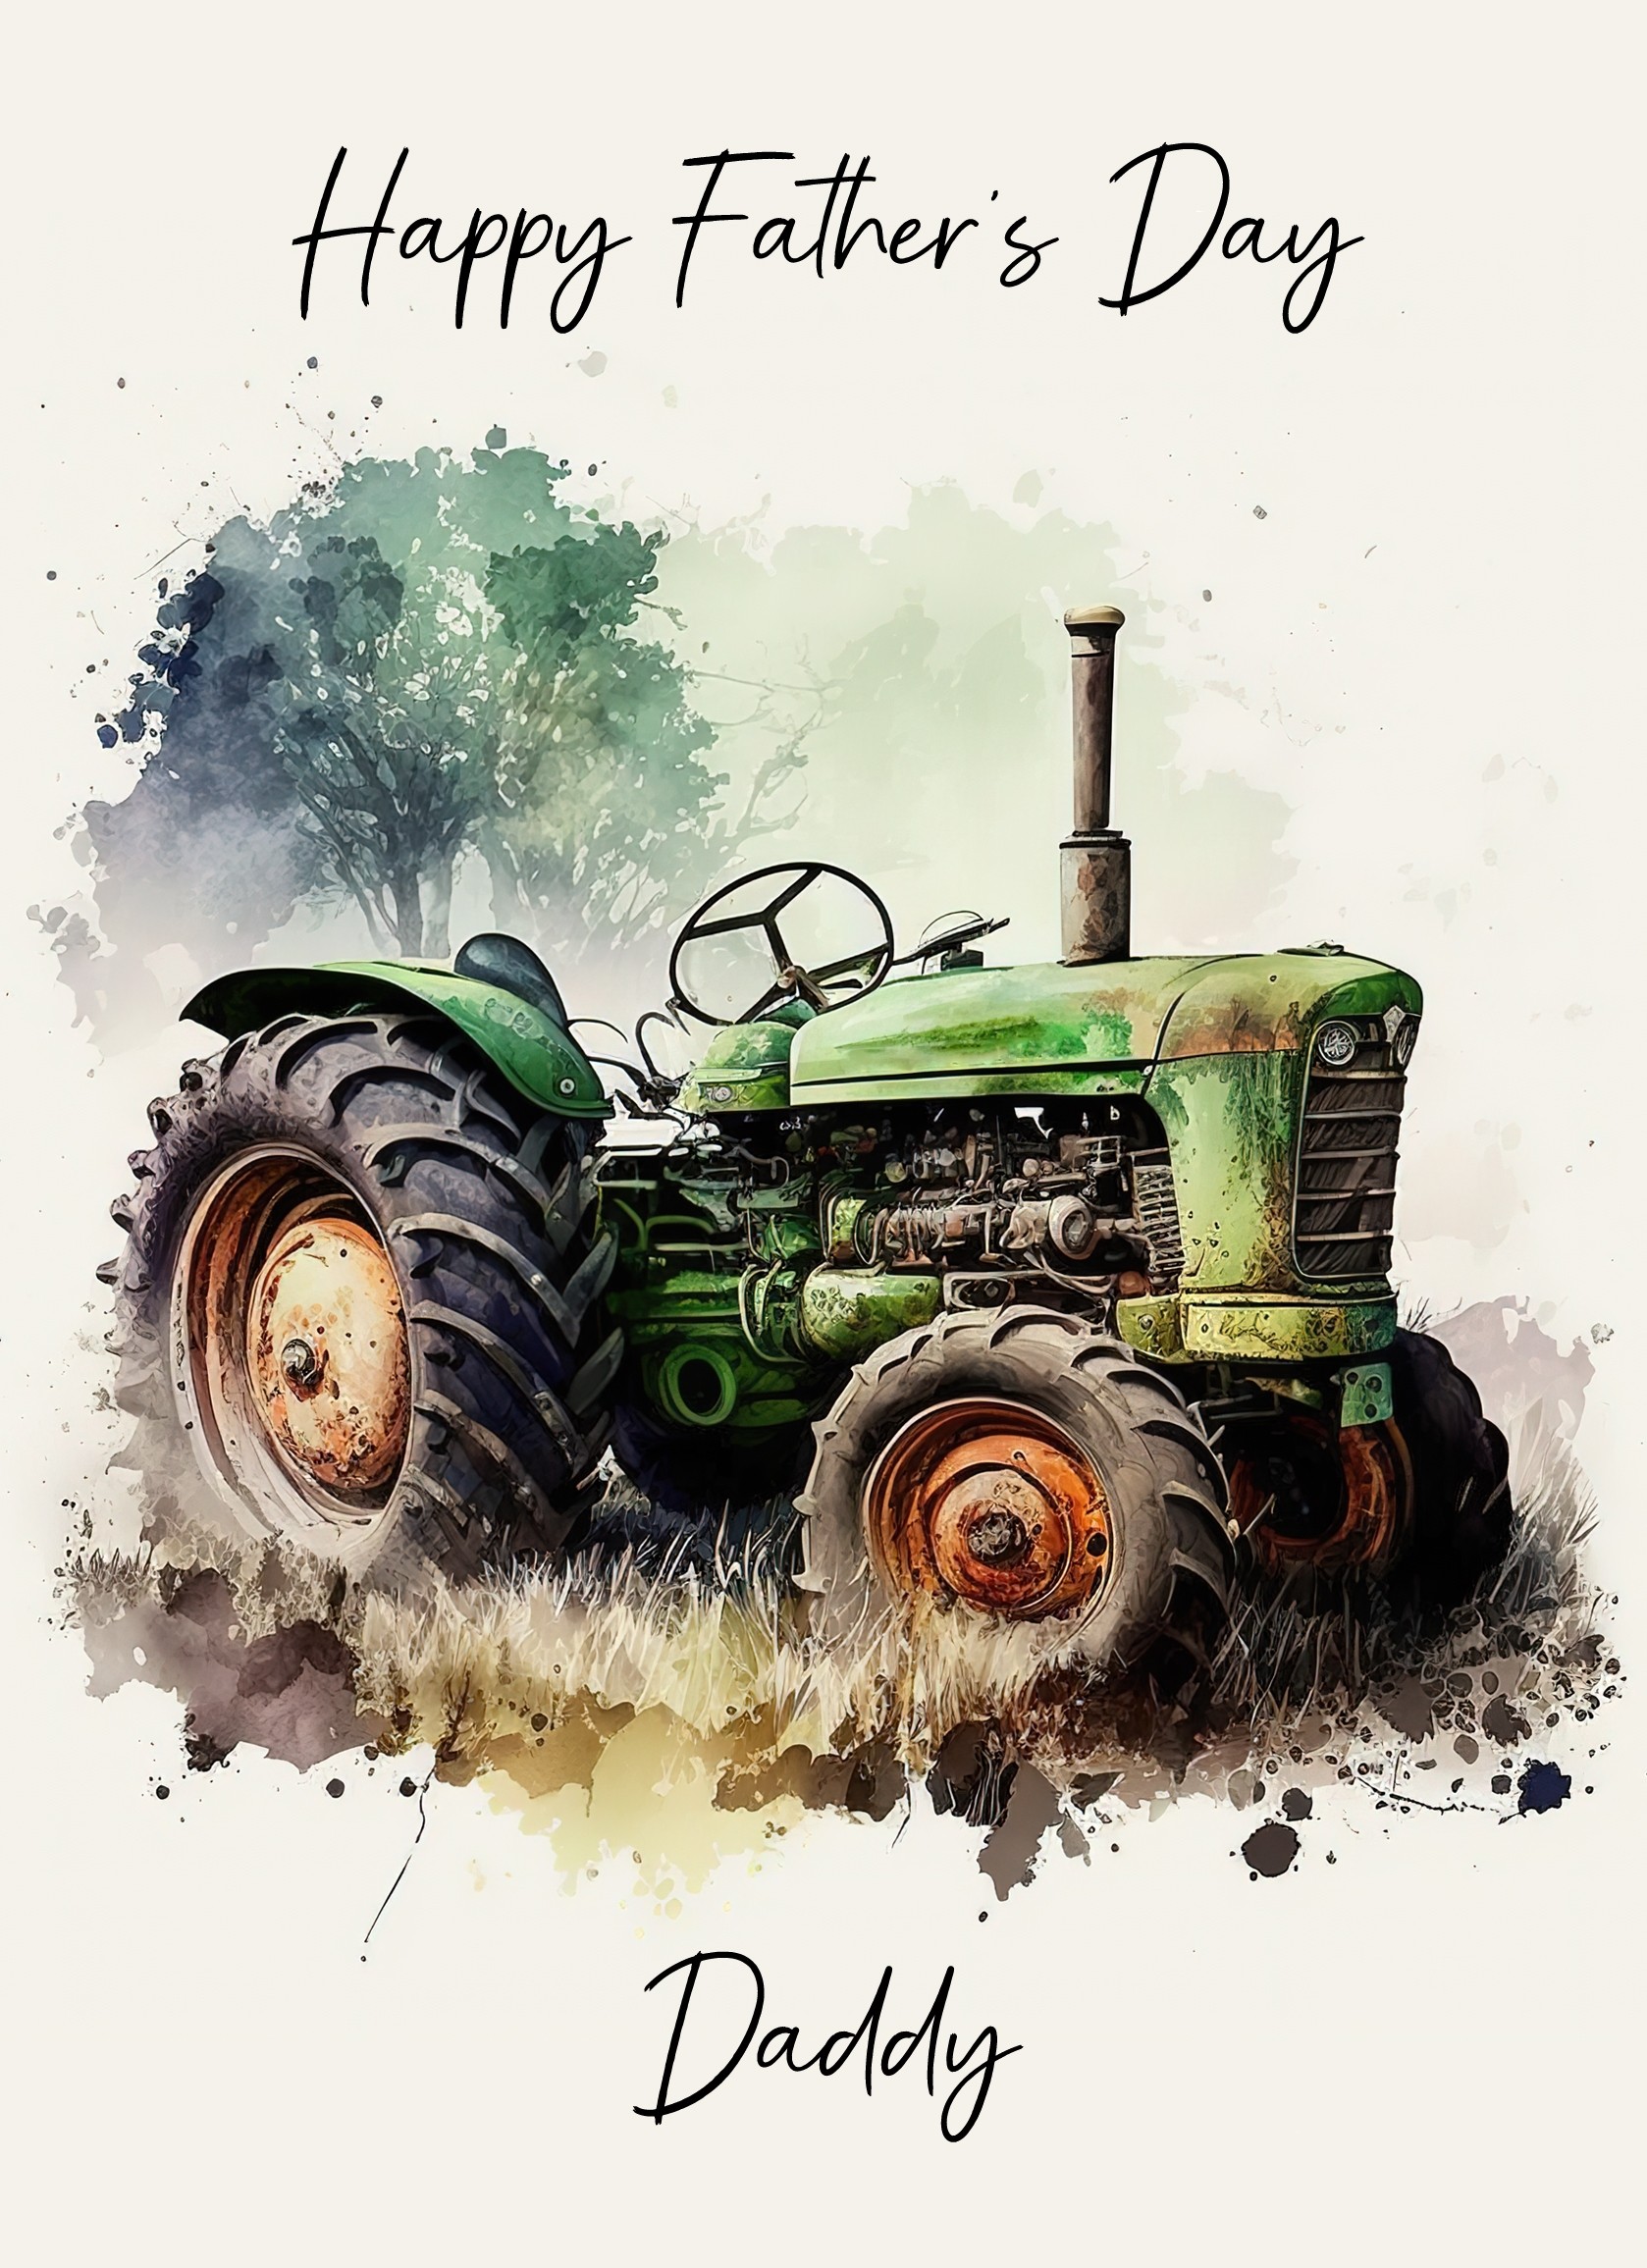 Tractor Fathers Day Card for Daddy